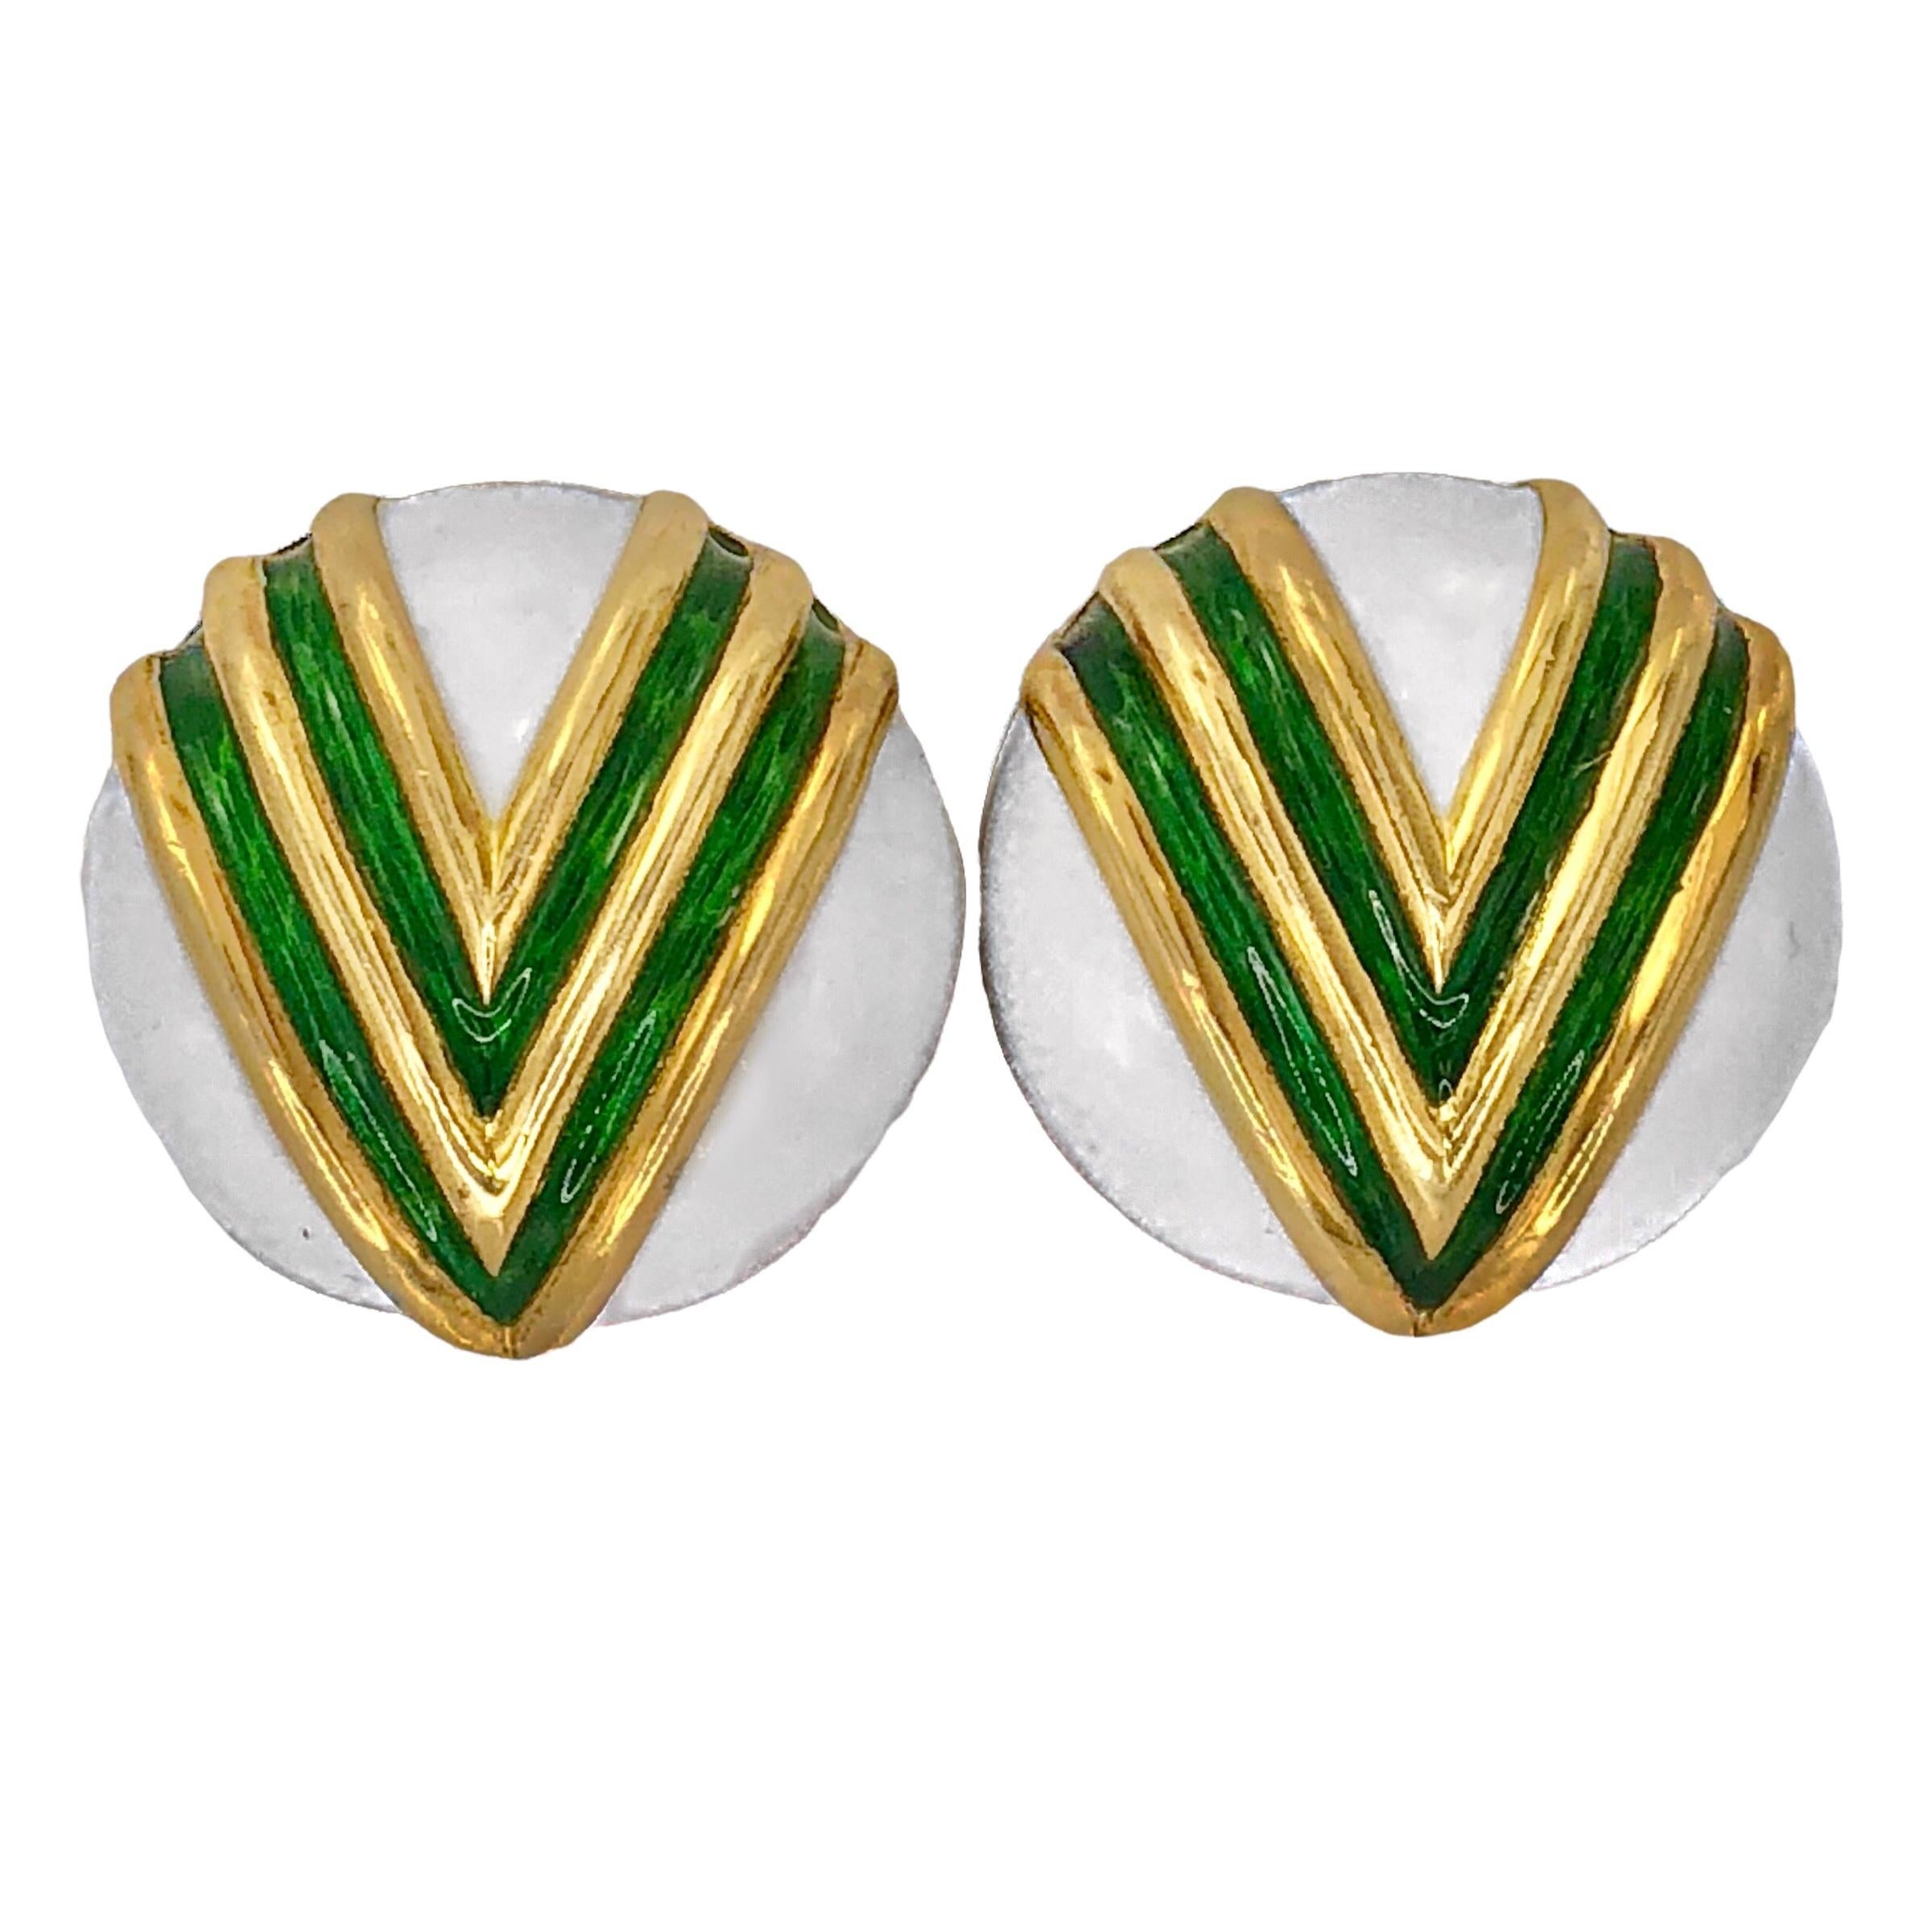 This unique pair of Tiffany & Company 18K yellow gold round, white enamel earrings are accented with a striking double chevron design in green enamel. Measures 7/8 inches in diameter. Equipped with fold down omega style clip backs.  Signed Tiffany &